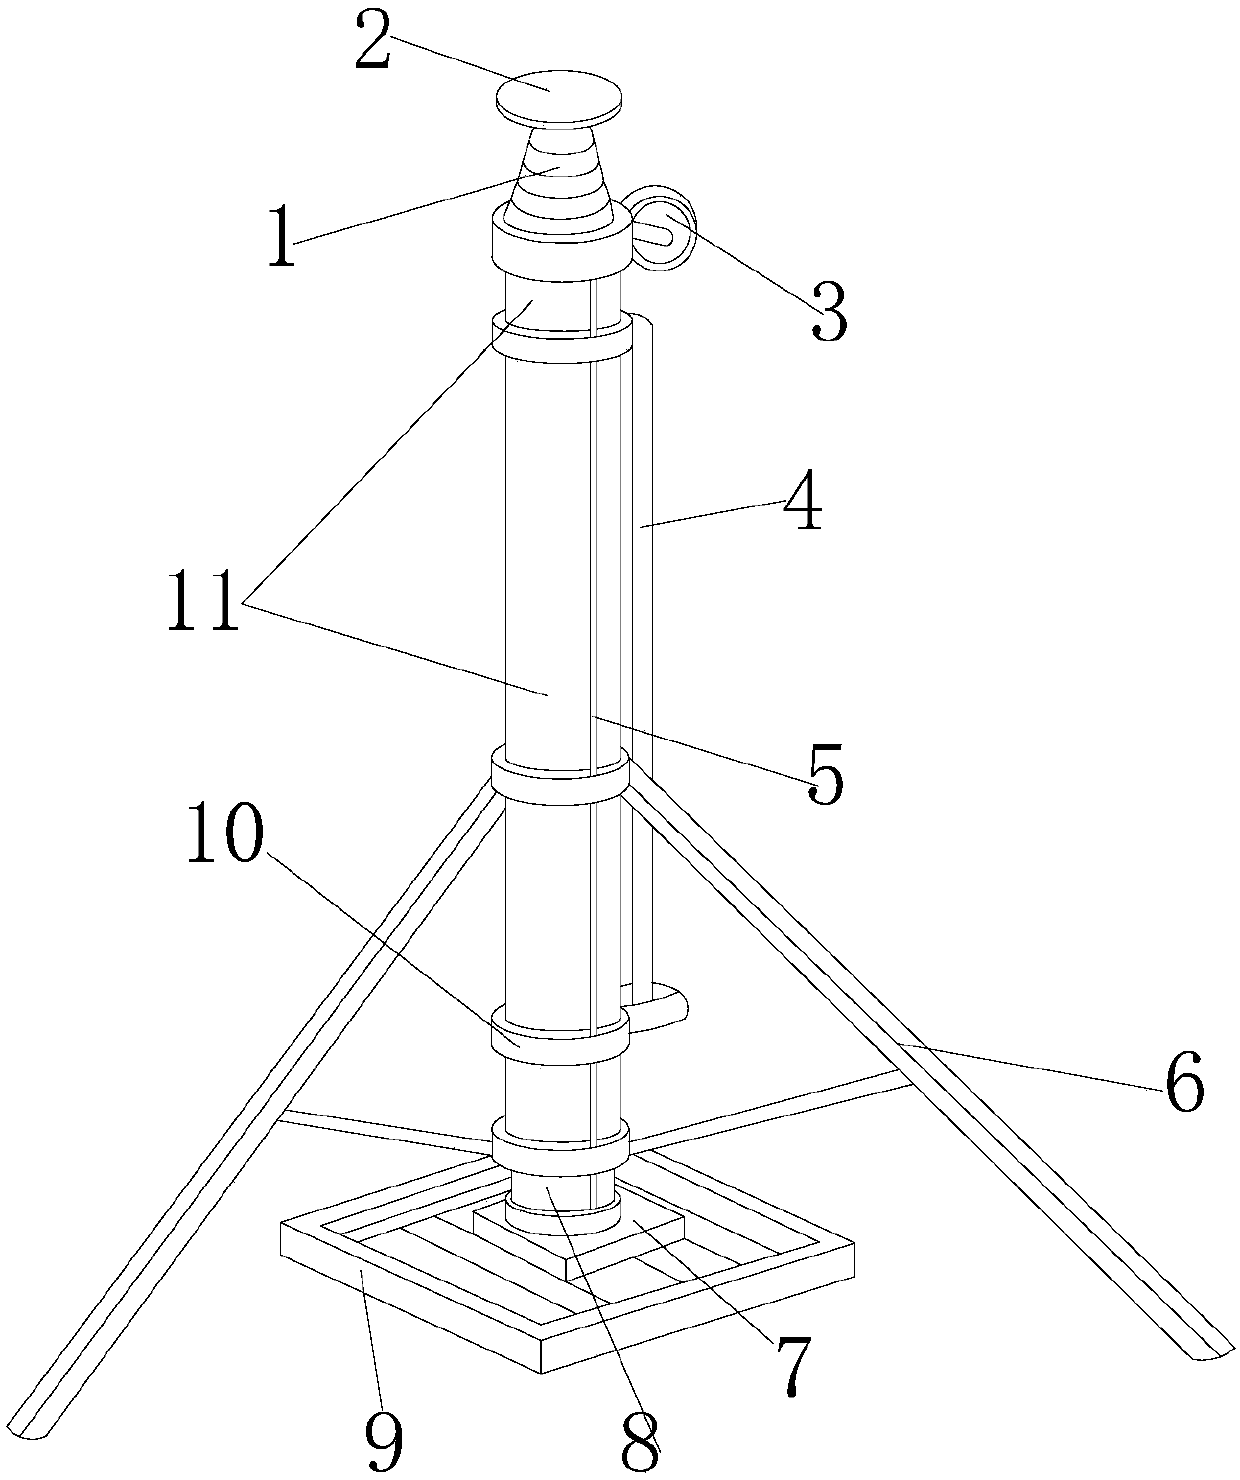 Novel construction engineering supporting device